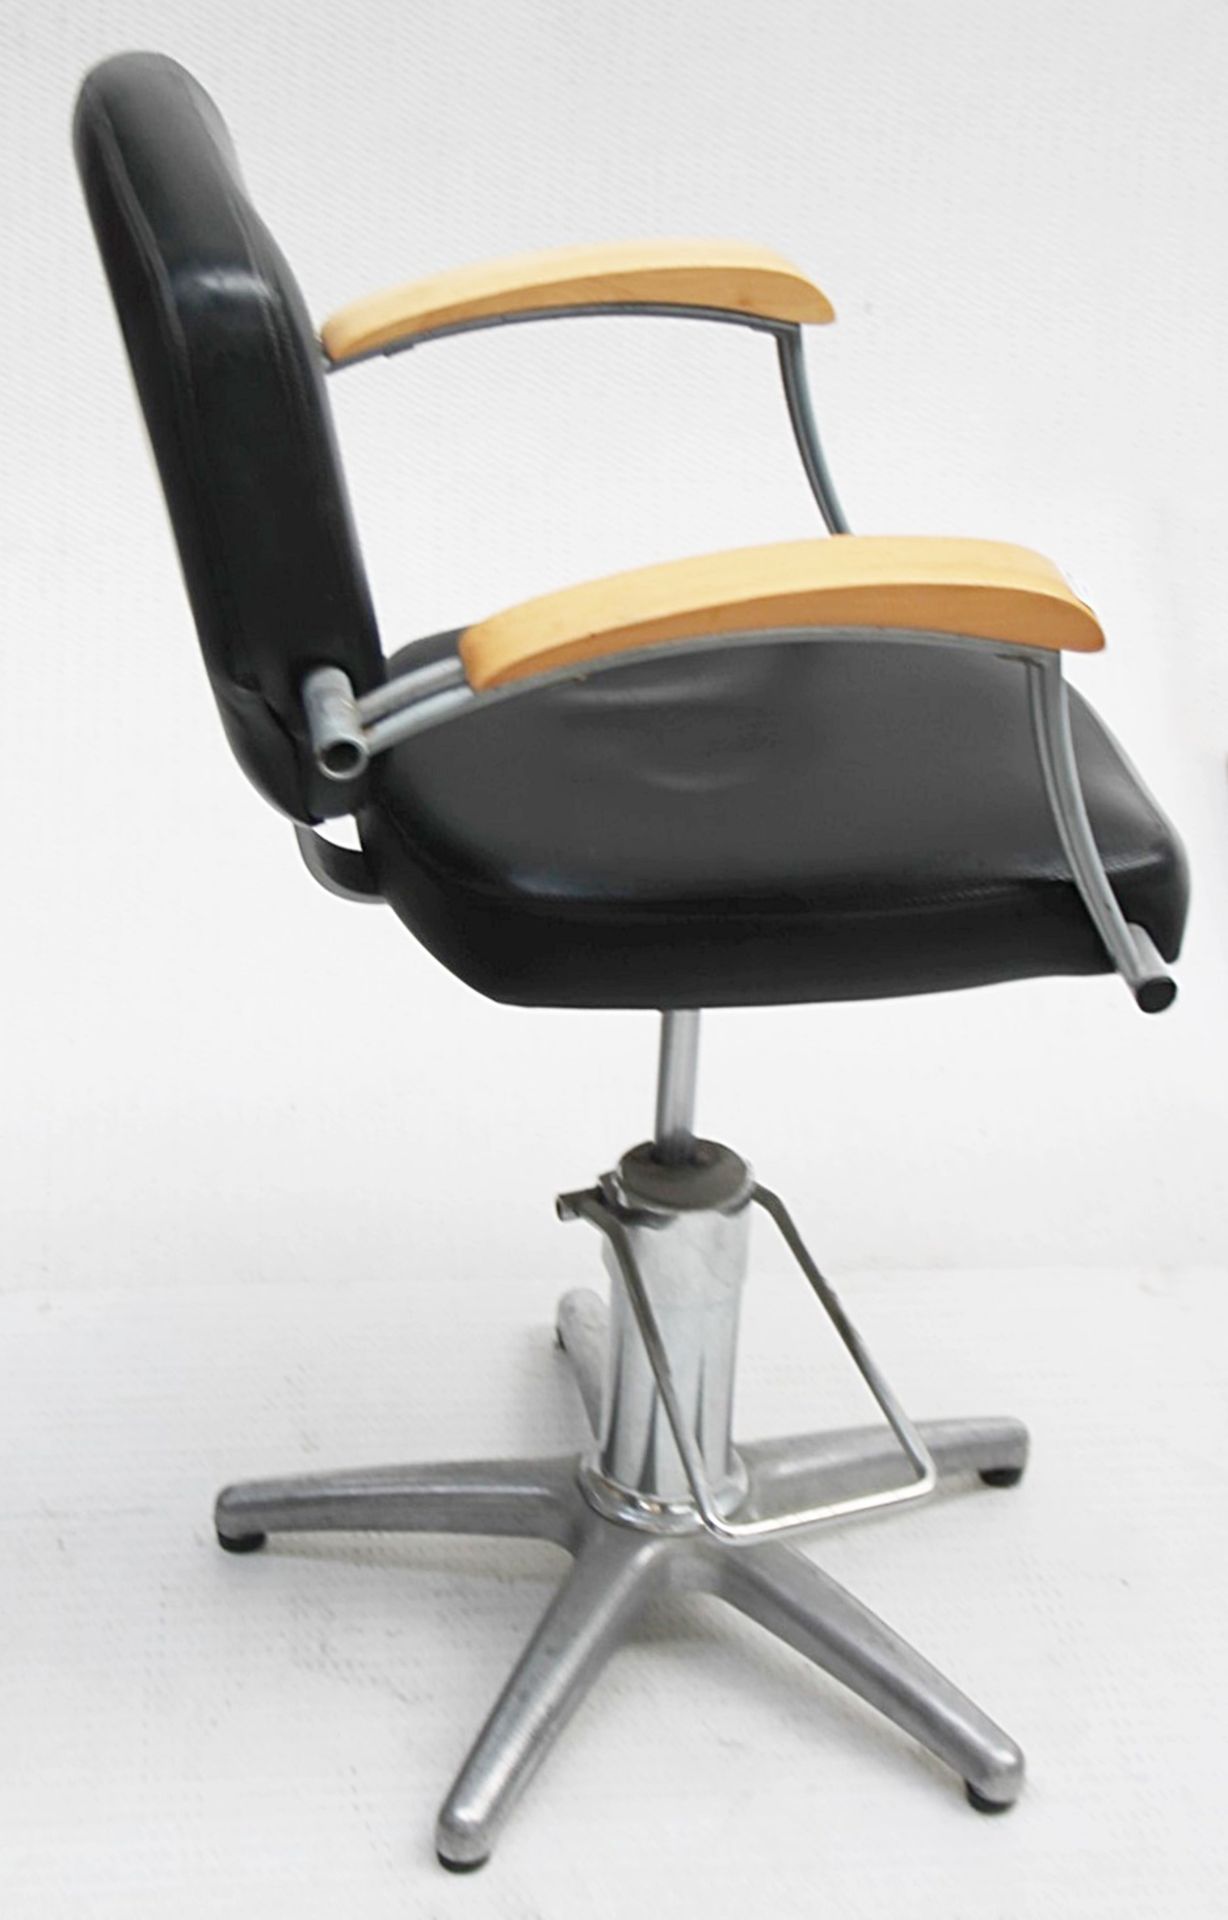 1 x Adjustable Black Hydraulic Barber Hairdressing Chair - Recently Removed From A Boutique Hair - Image 8 of 10